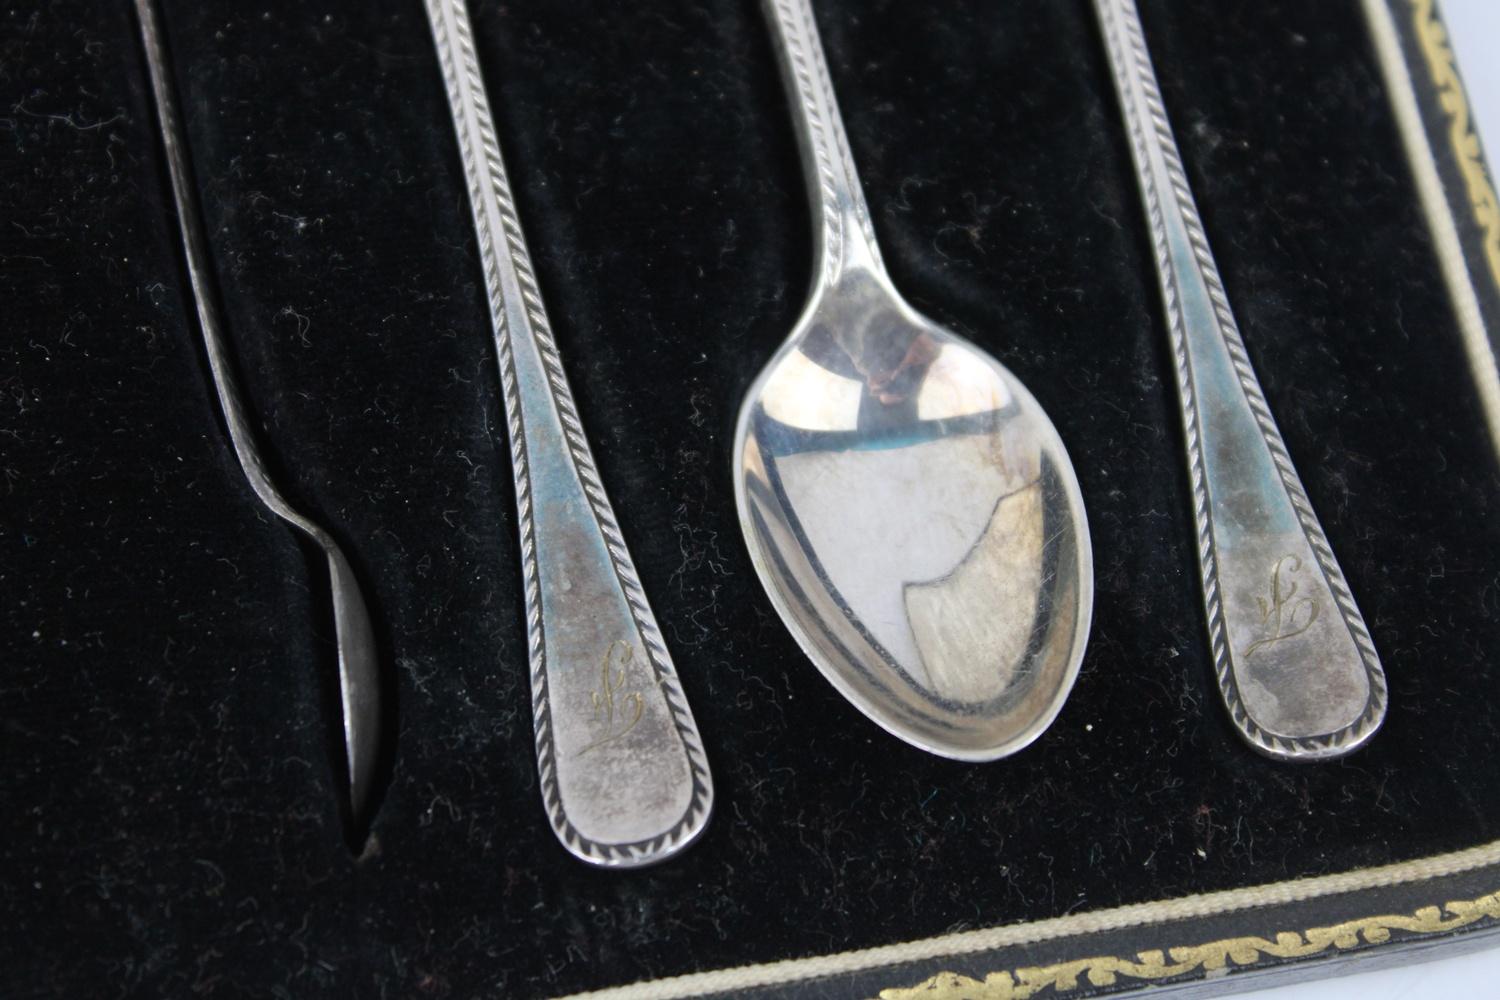 Antique Hallmarked 1916 Sheffield silver teaspoons with sugar tongs maker - Joseph Rodgers & Sons - Image 6 of 9